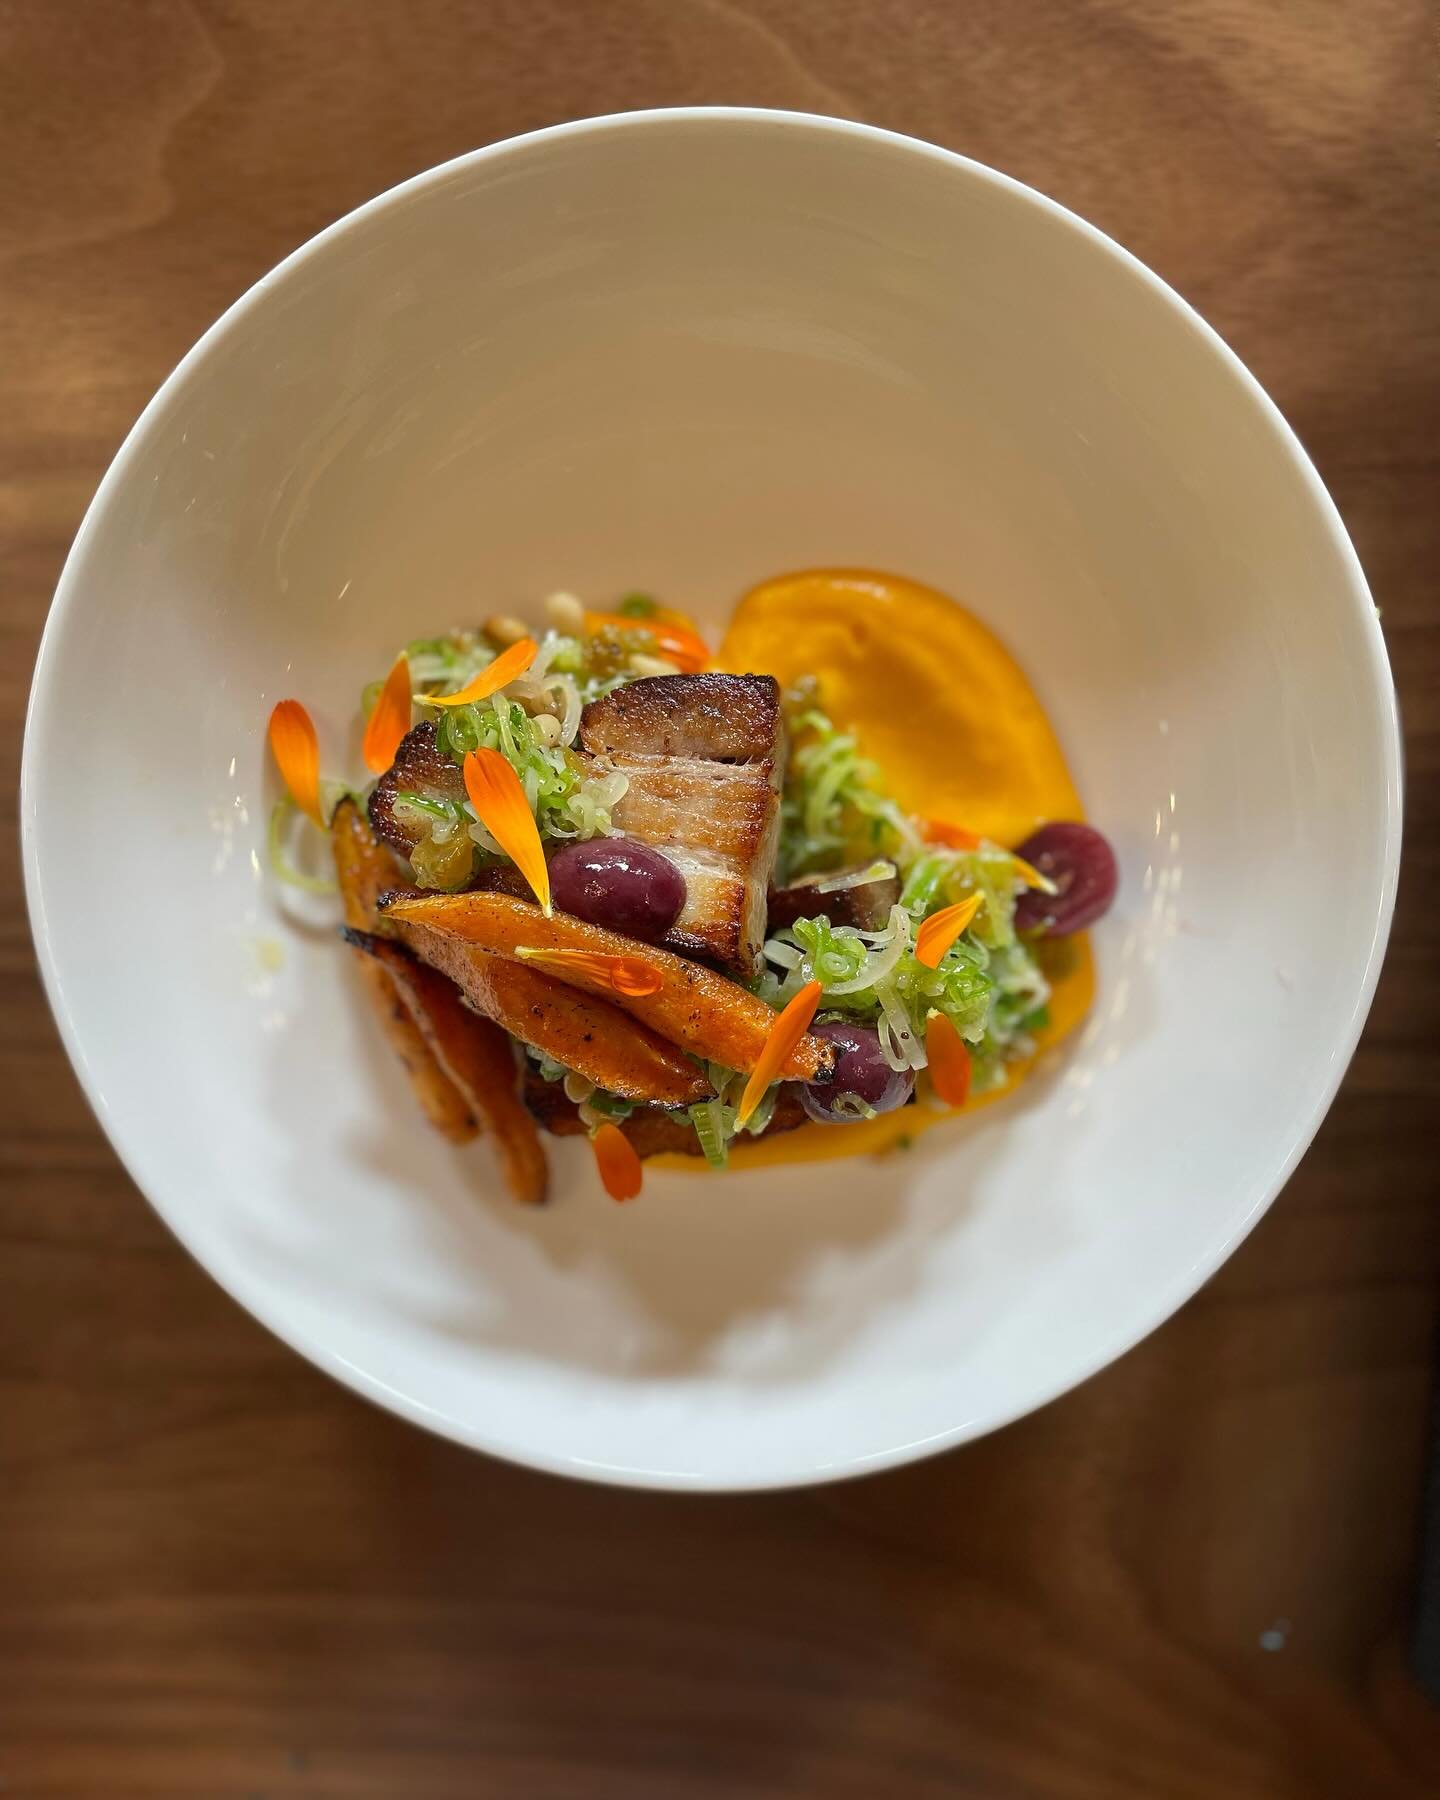 Spring is upon us and we&rsquo;re looking for ways to prepare loads of green garlic! Check out this recipe for Green Garlic Relish that our chef pairs with braised pork belly, heirloom carrots, and pickled fruit. 

Ingredients

1 pint very thinly sli